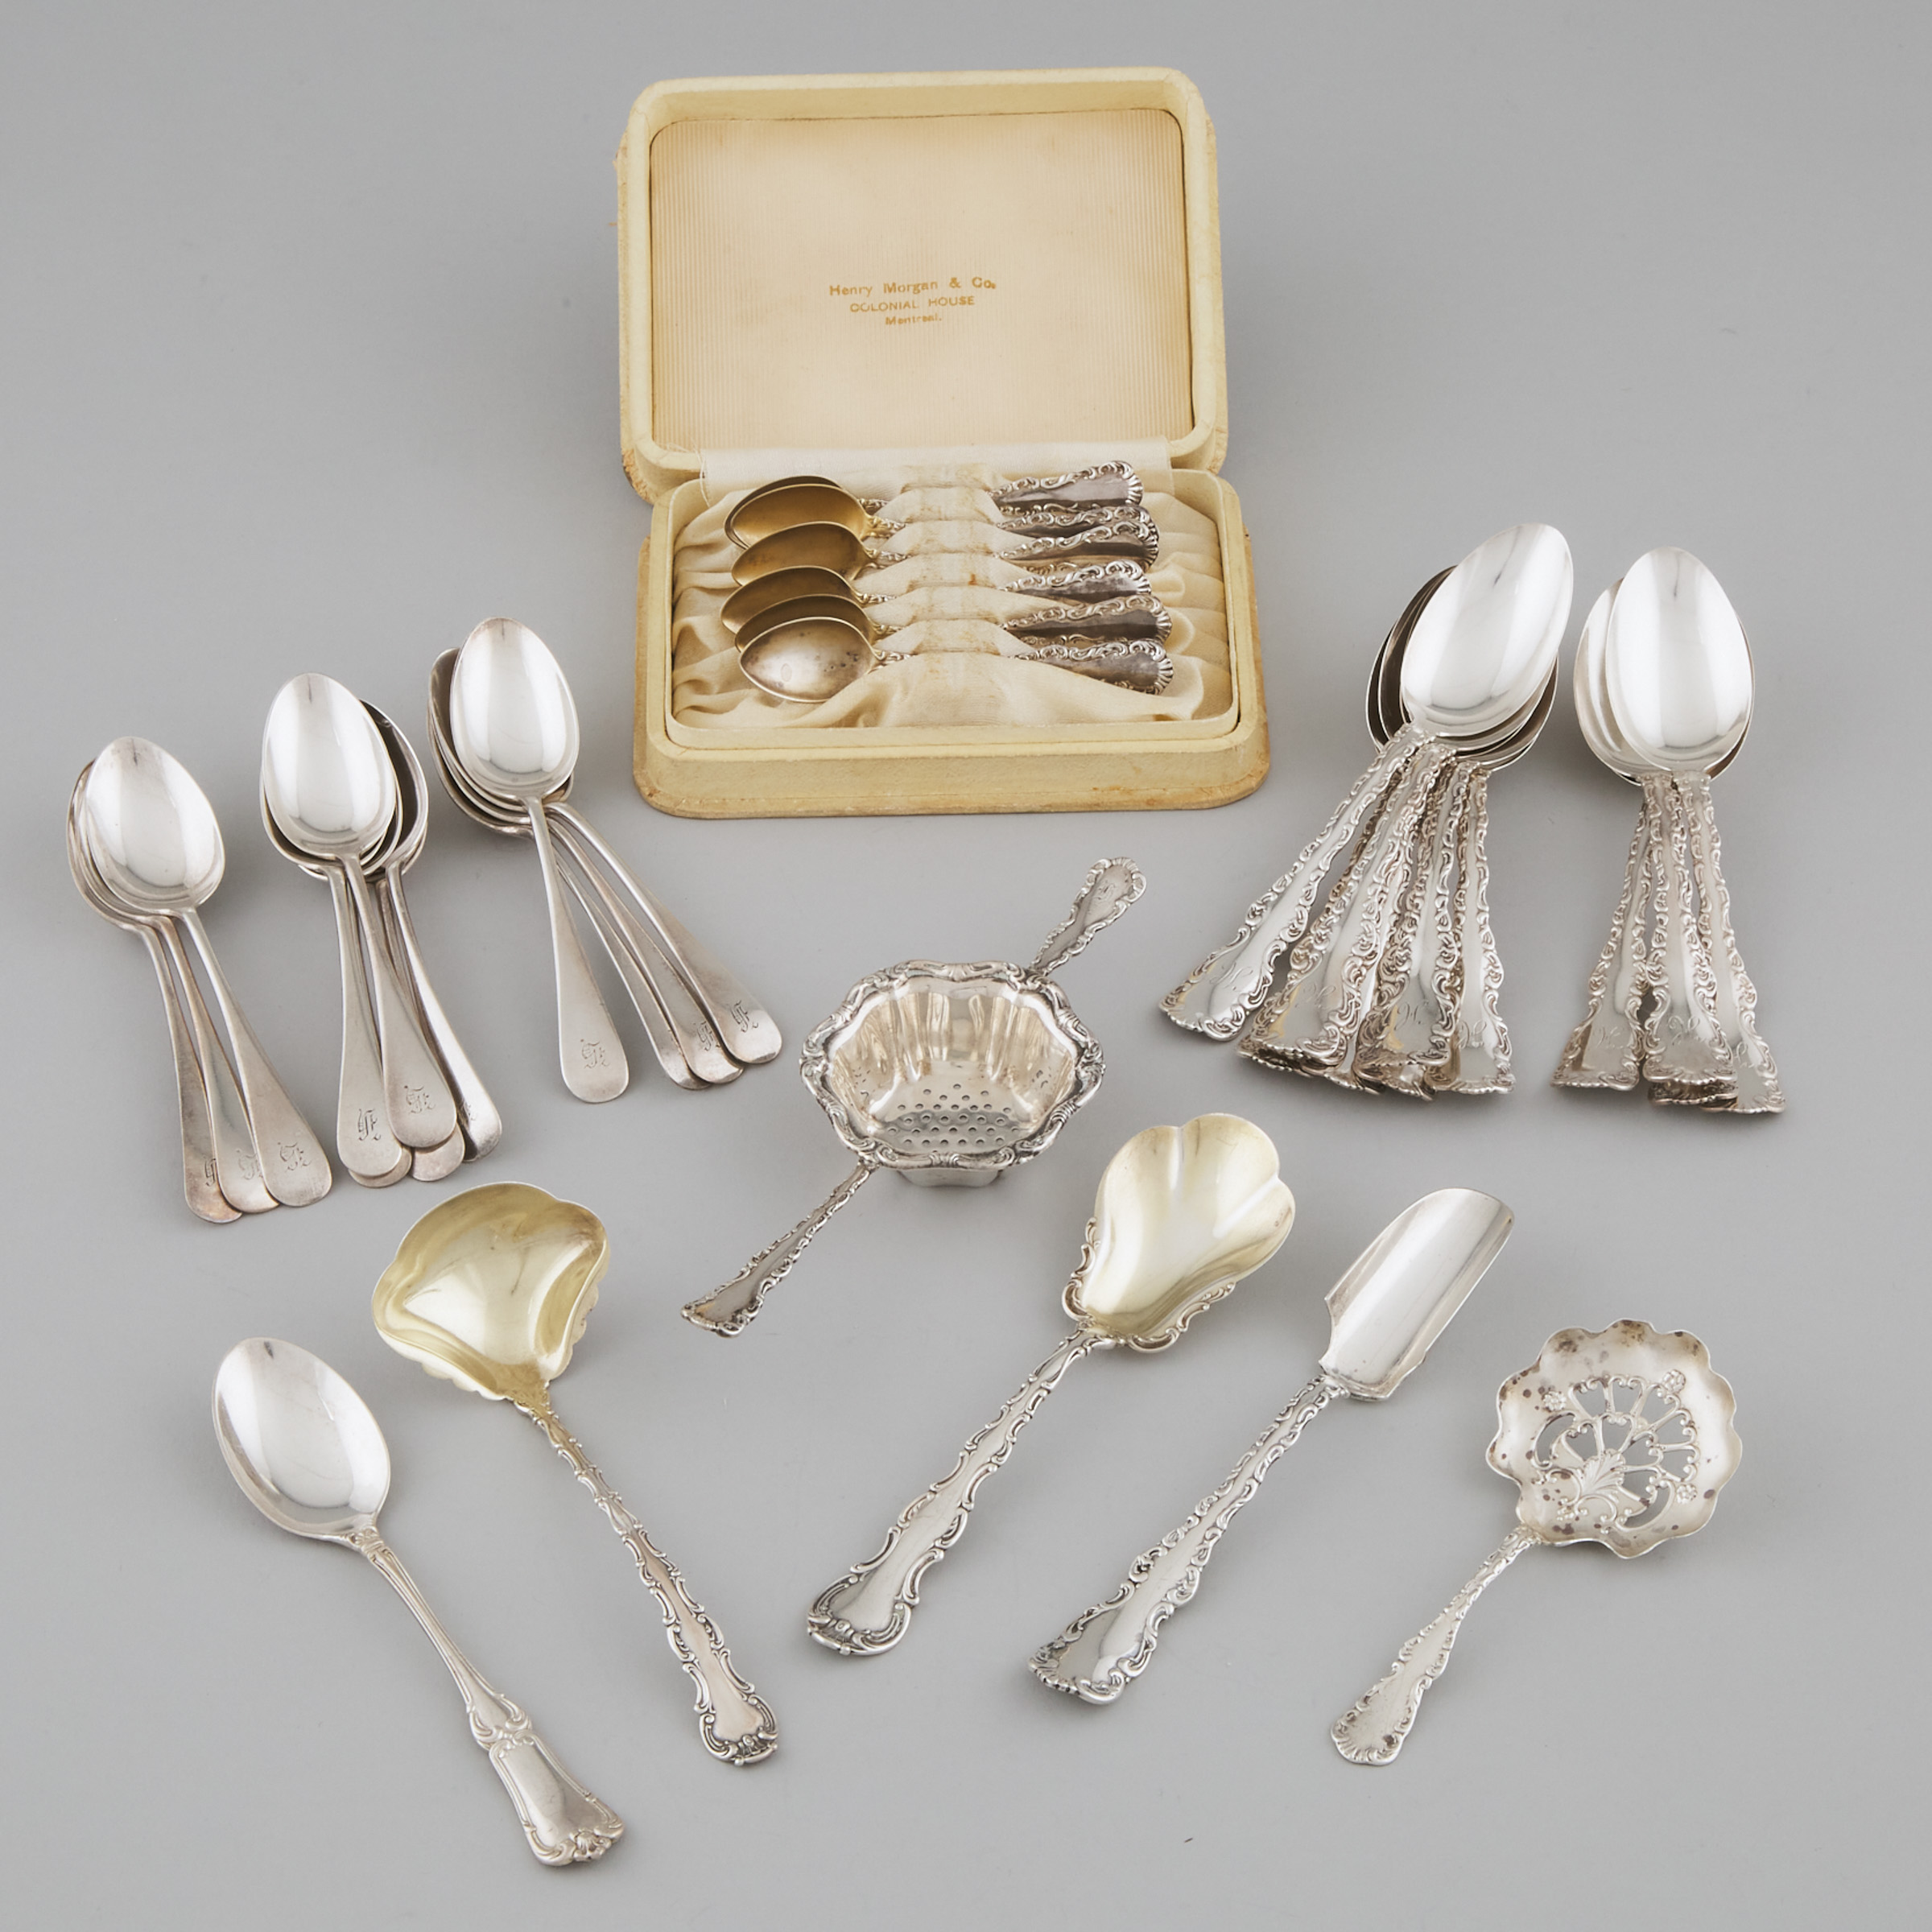 Group of Canadian Silver Flatware, 20th century